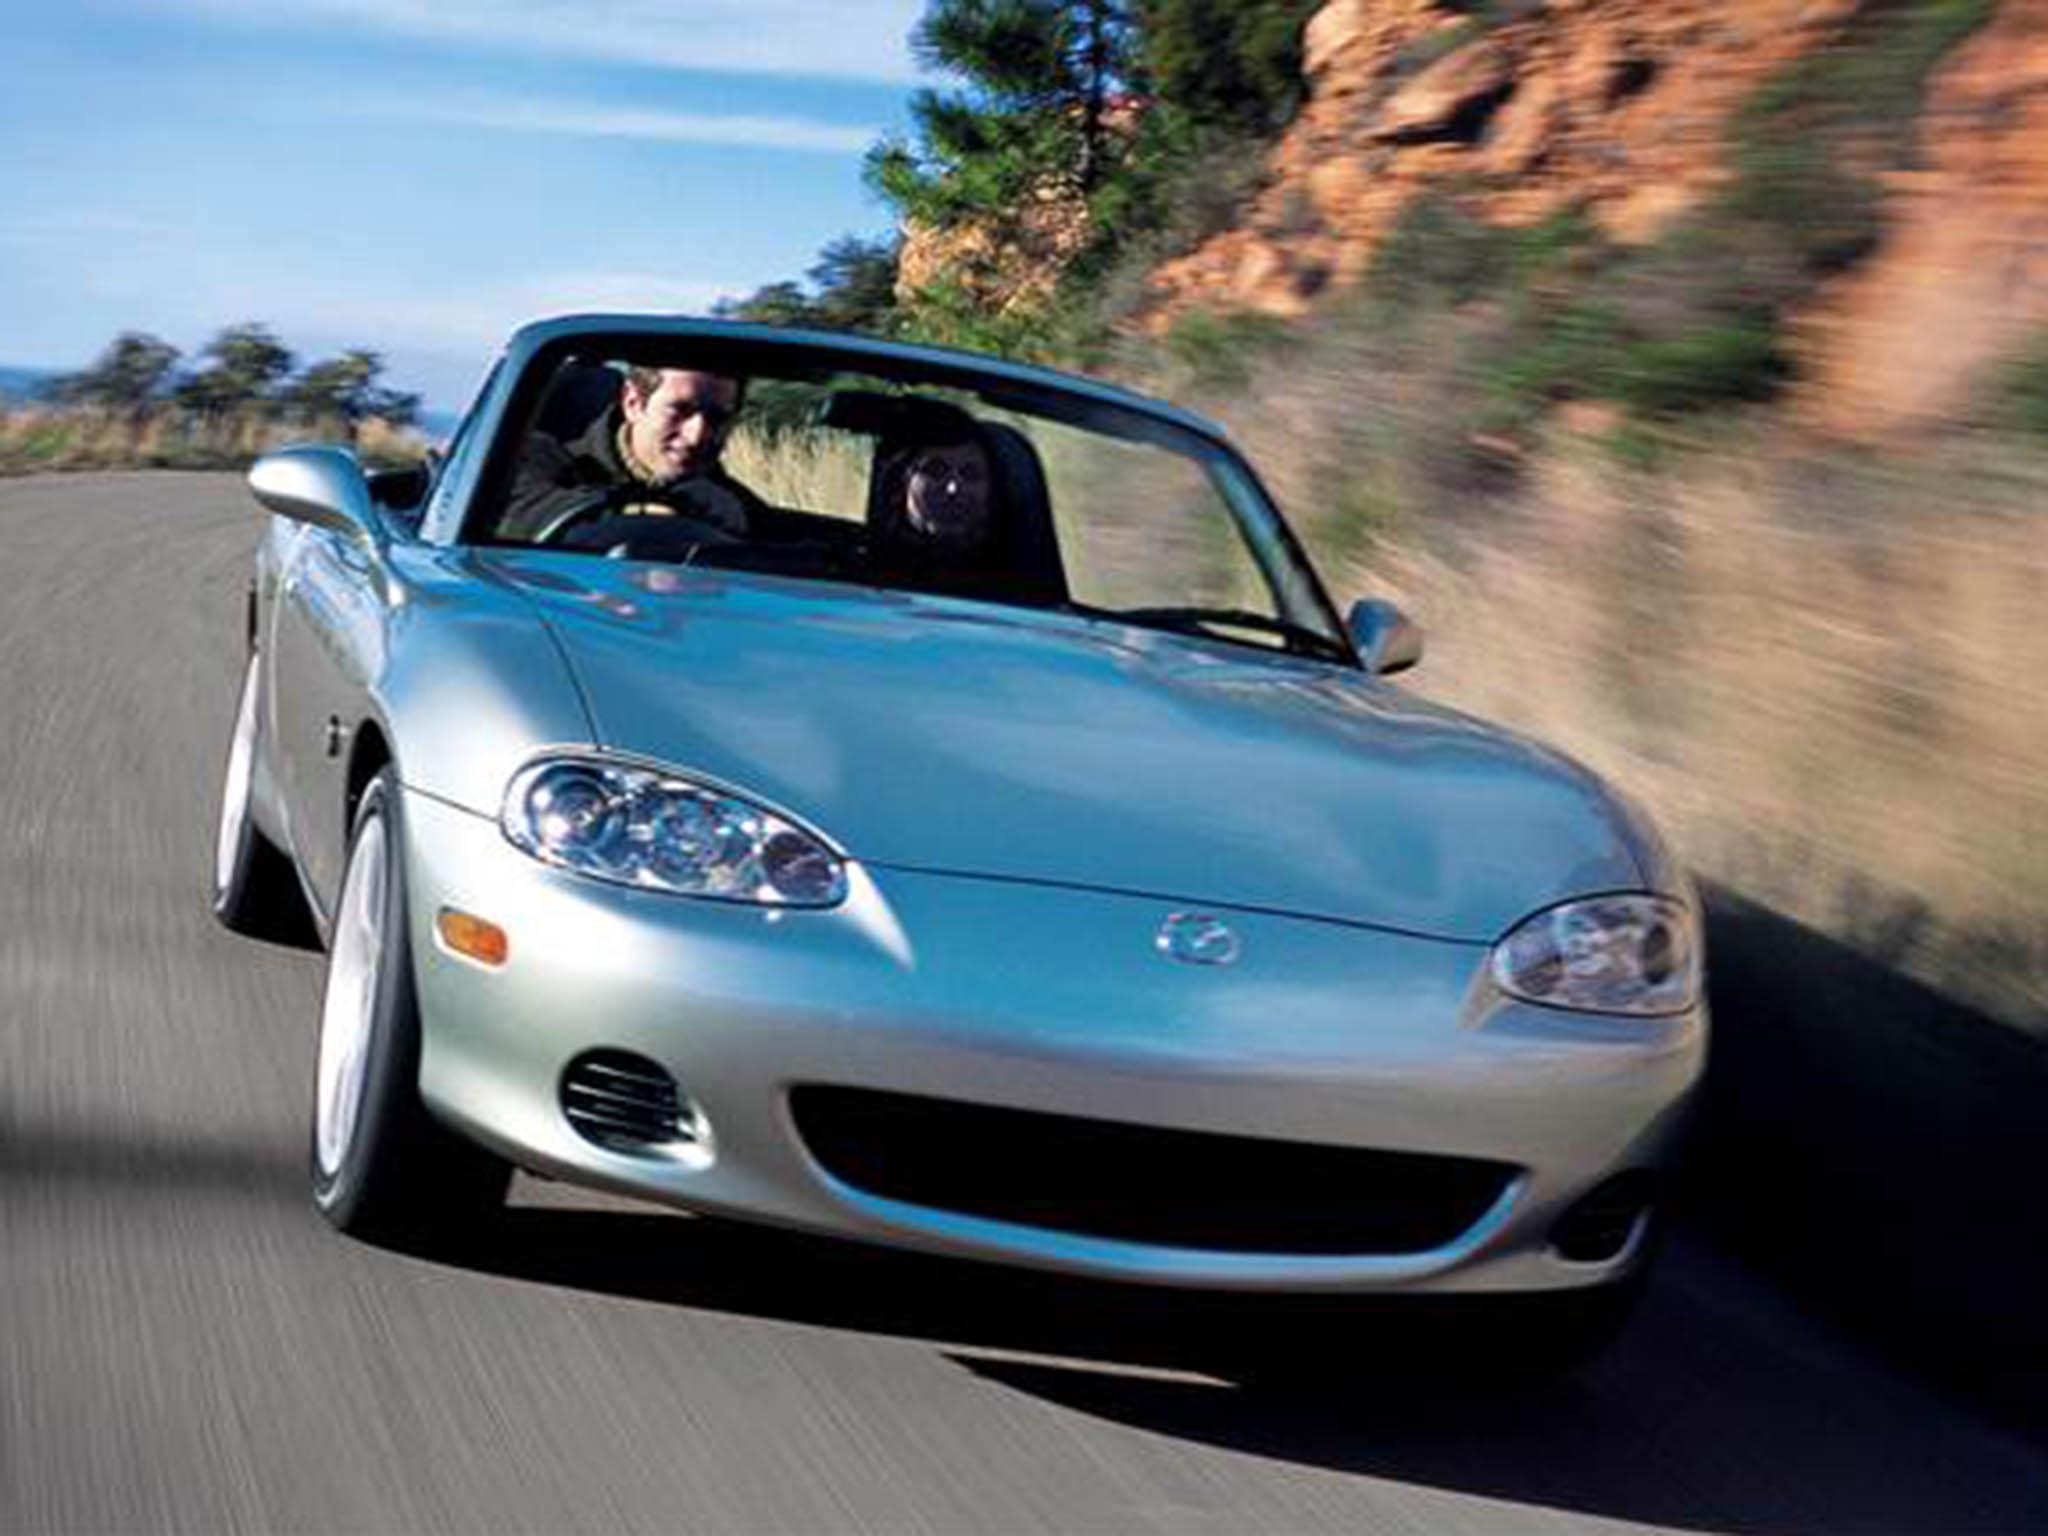 &#13;
The Mazda MX-5 is a more mature car which means used versions are normally well-kept&#13;